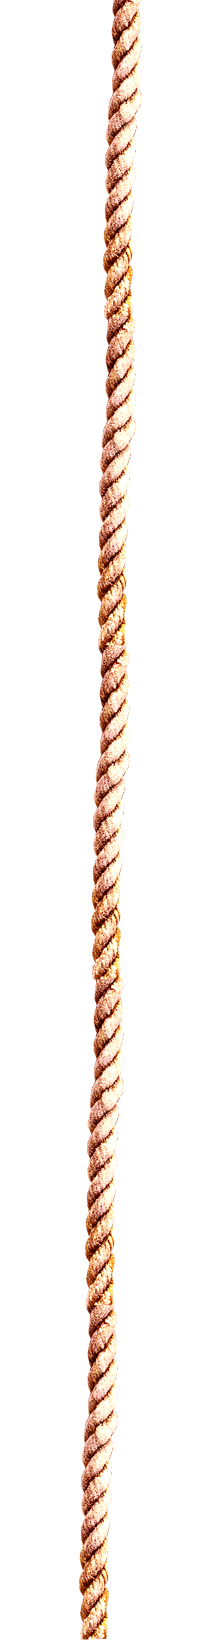 objects · rope